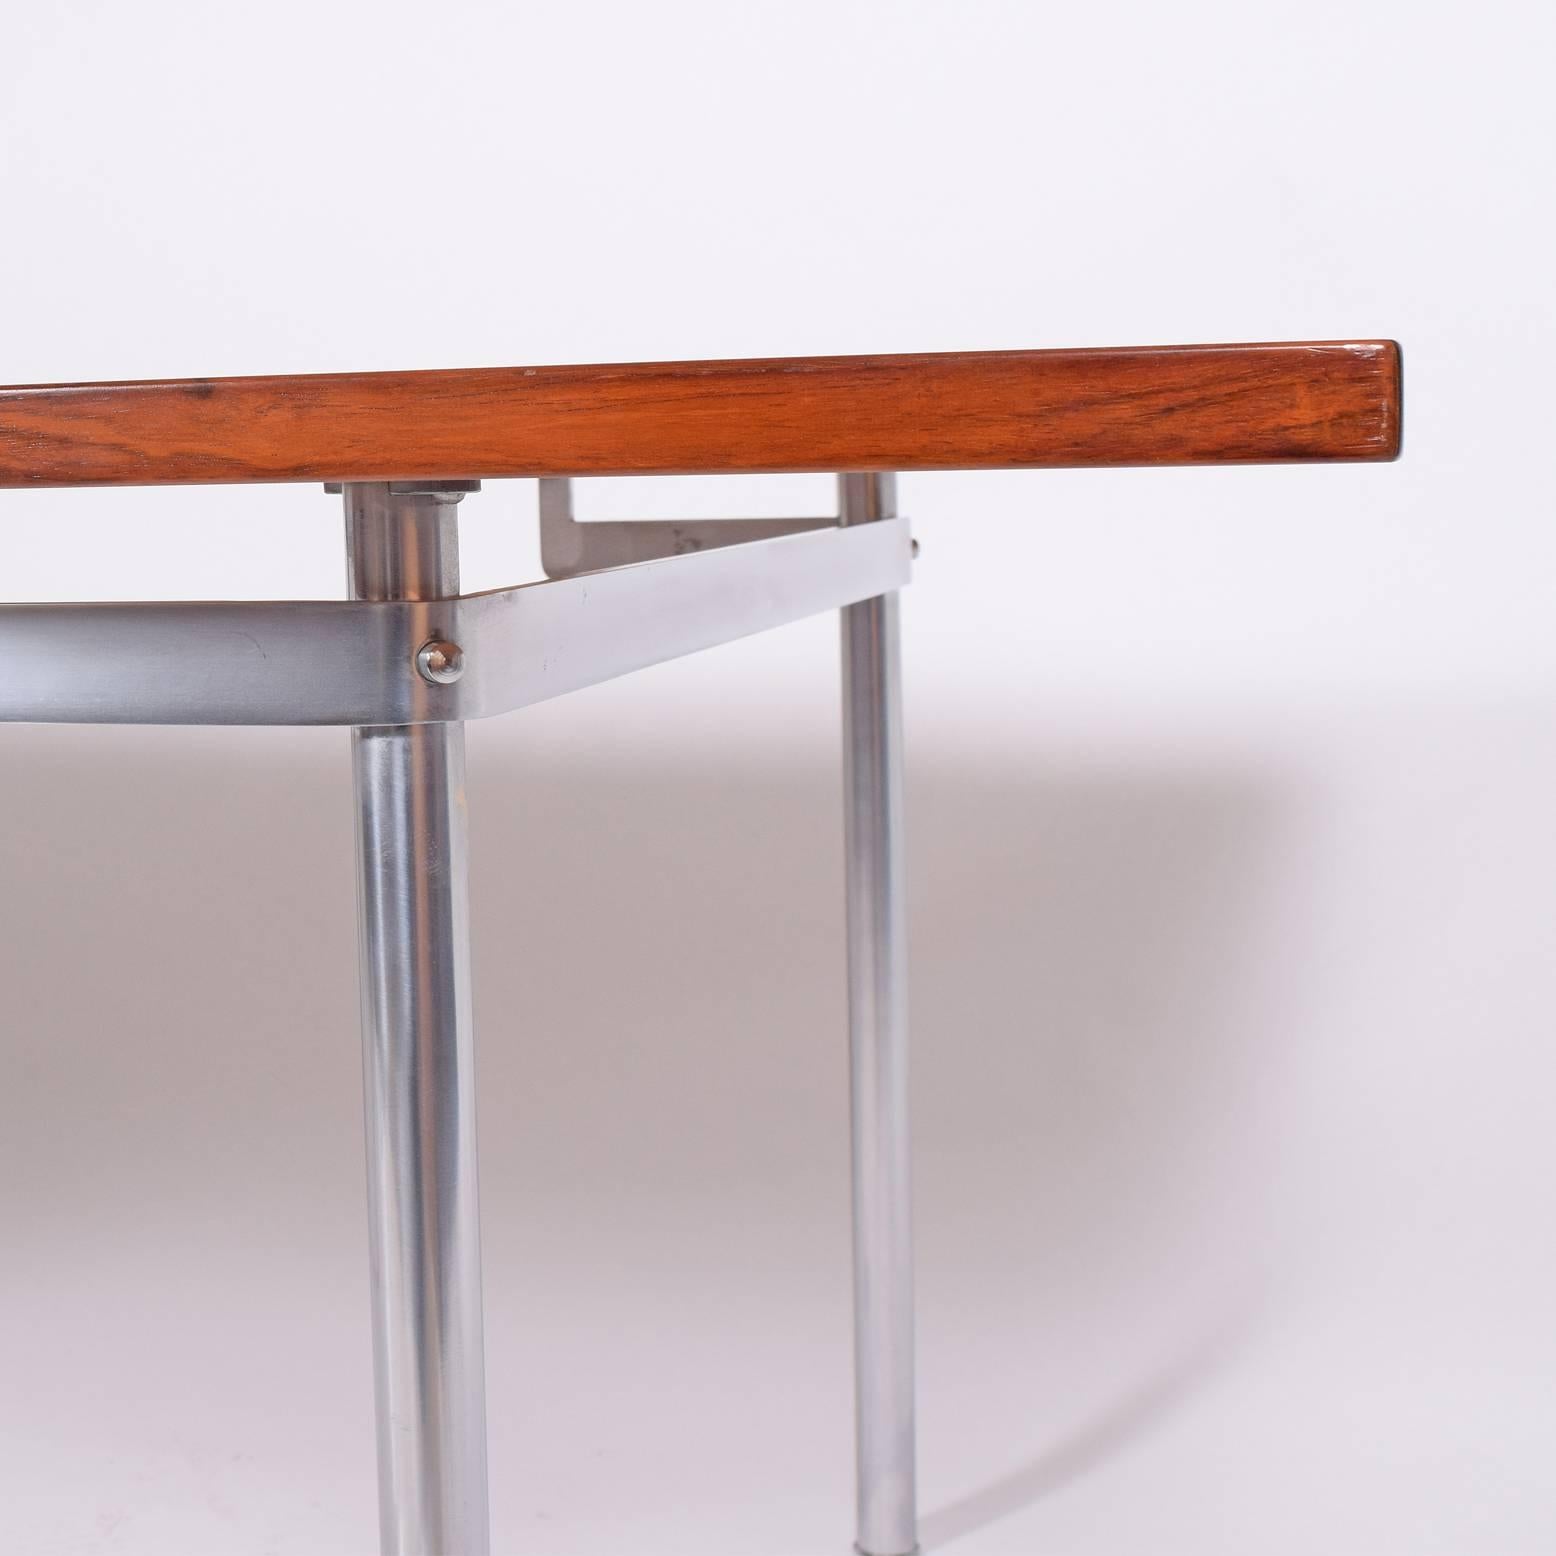 Mid-20th Century Working Dining Rosewood Table by Hans Wegner #AT-318 for Andreas Tuck For Sale